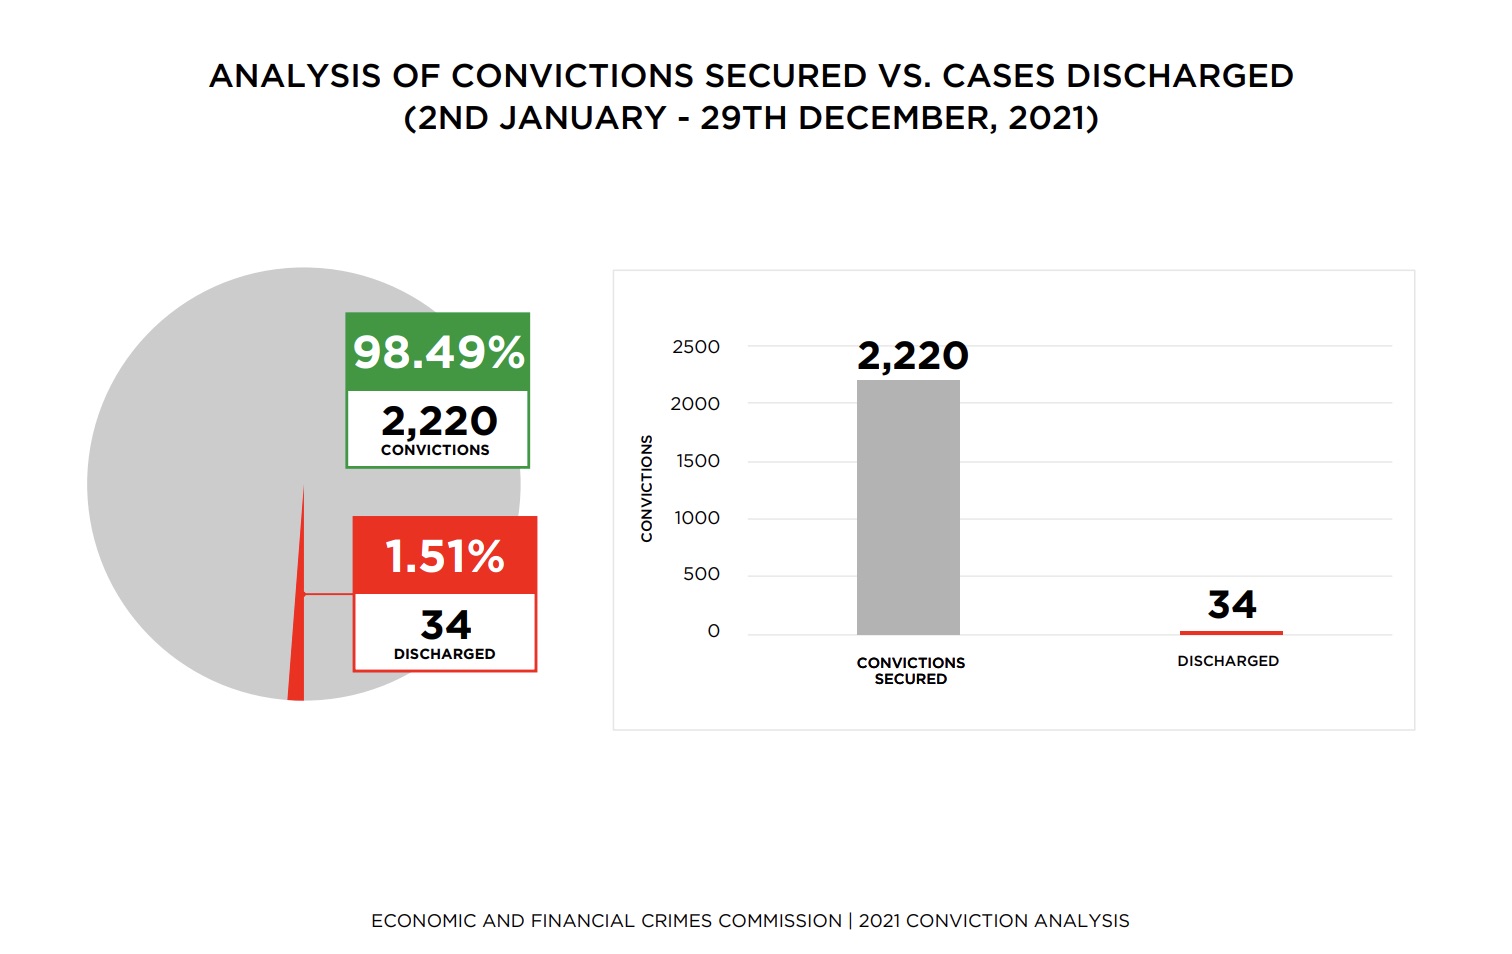 EFCC analysis of convictions v discharged cases